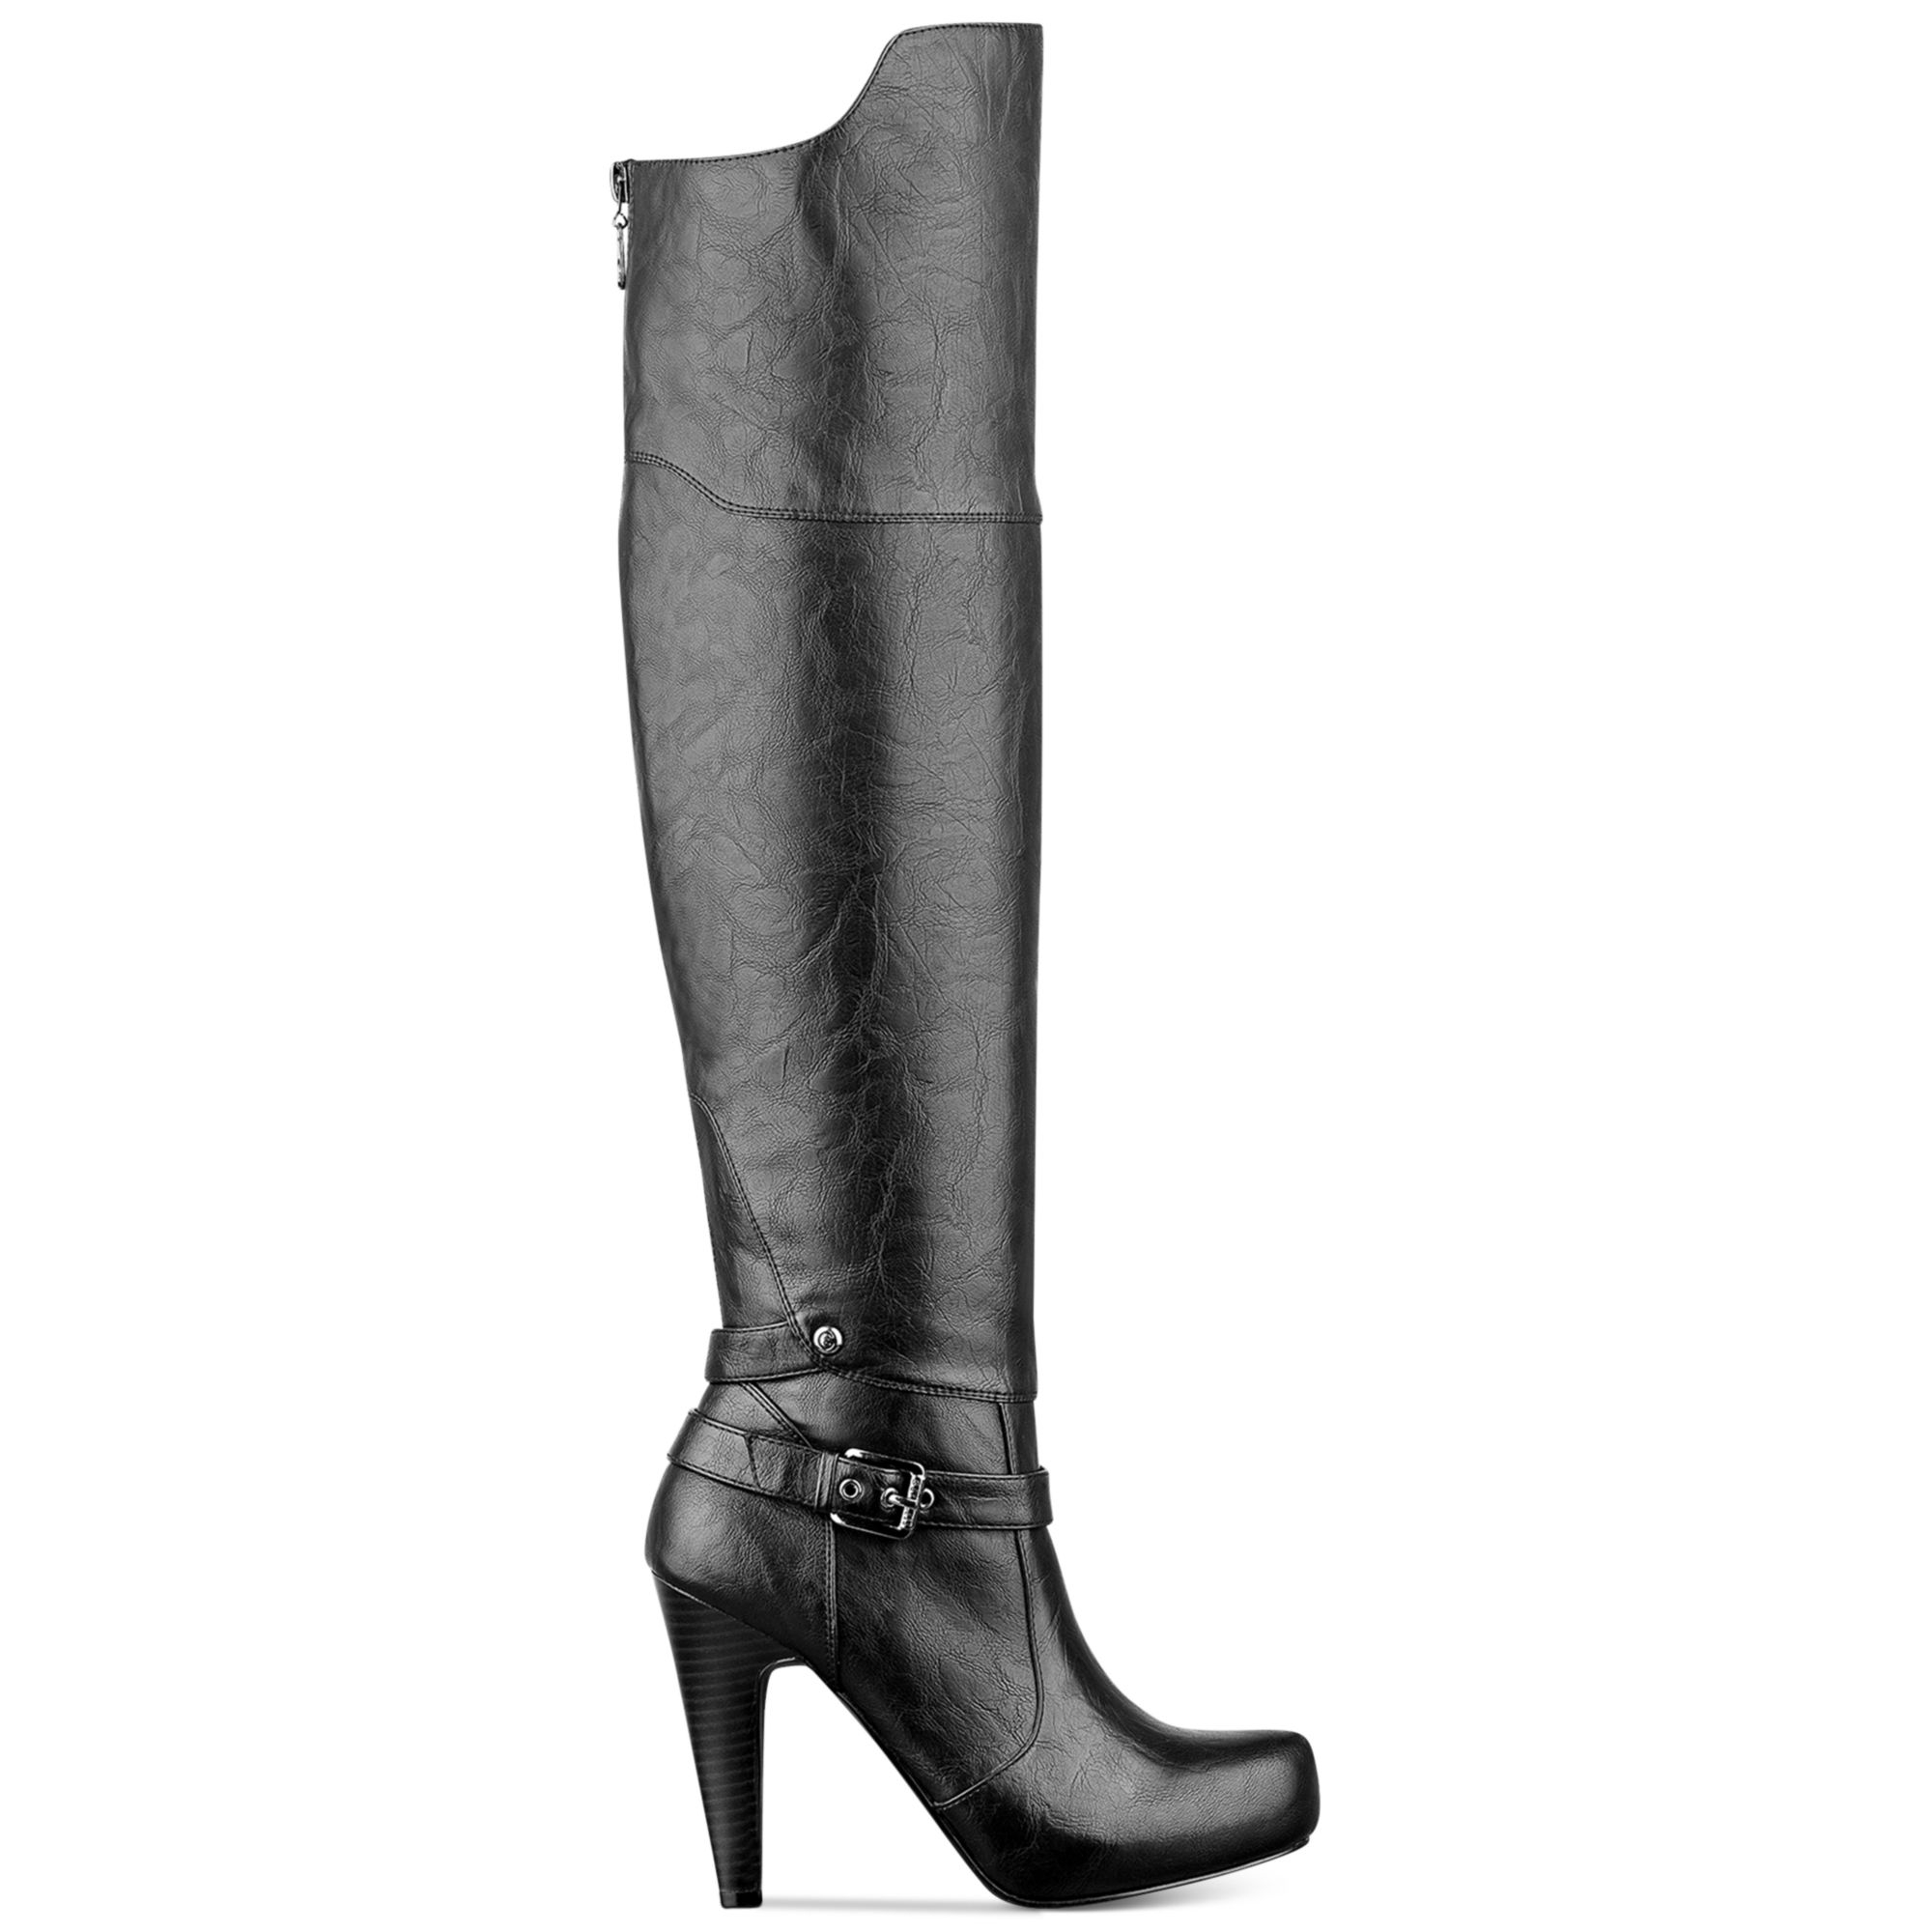 Lyst G By Guess Trinna Over the Knee Platform Dress Boots in Black